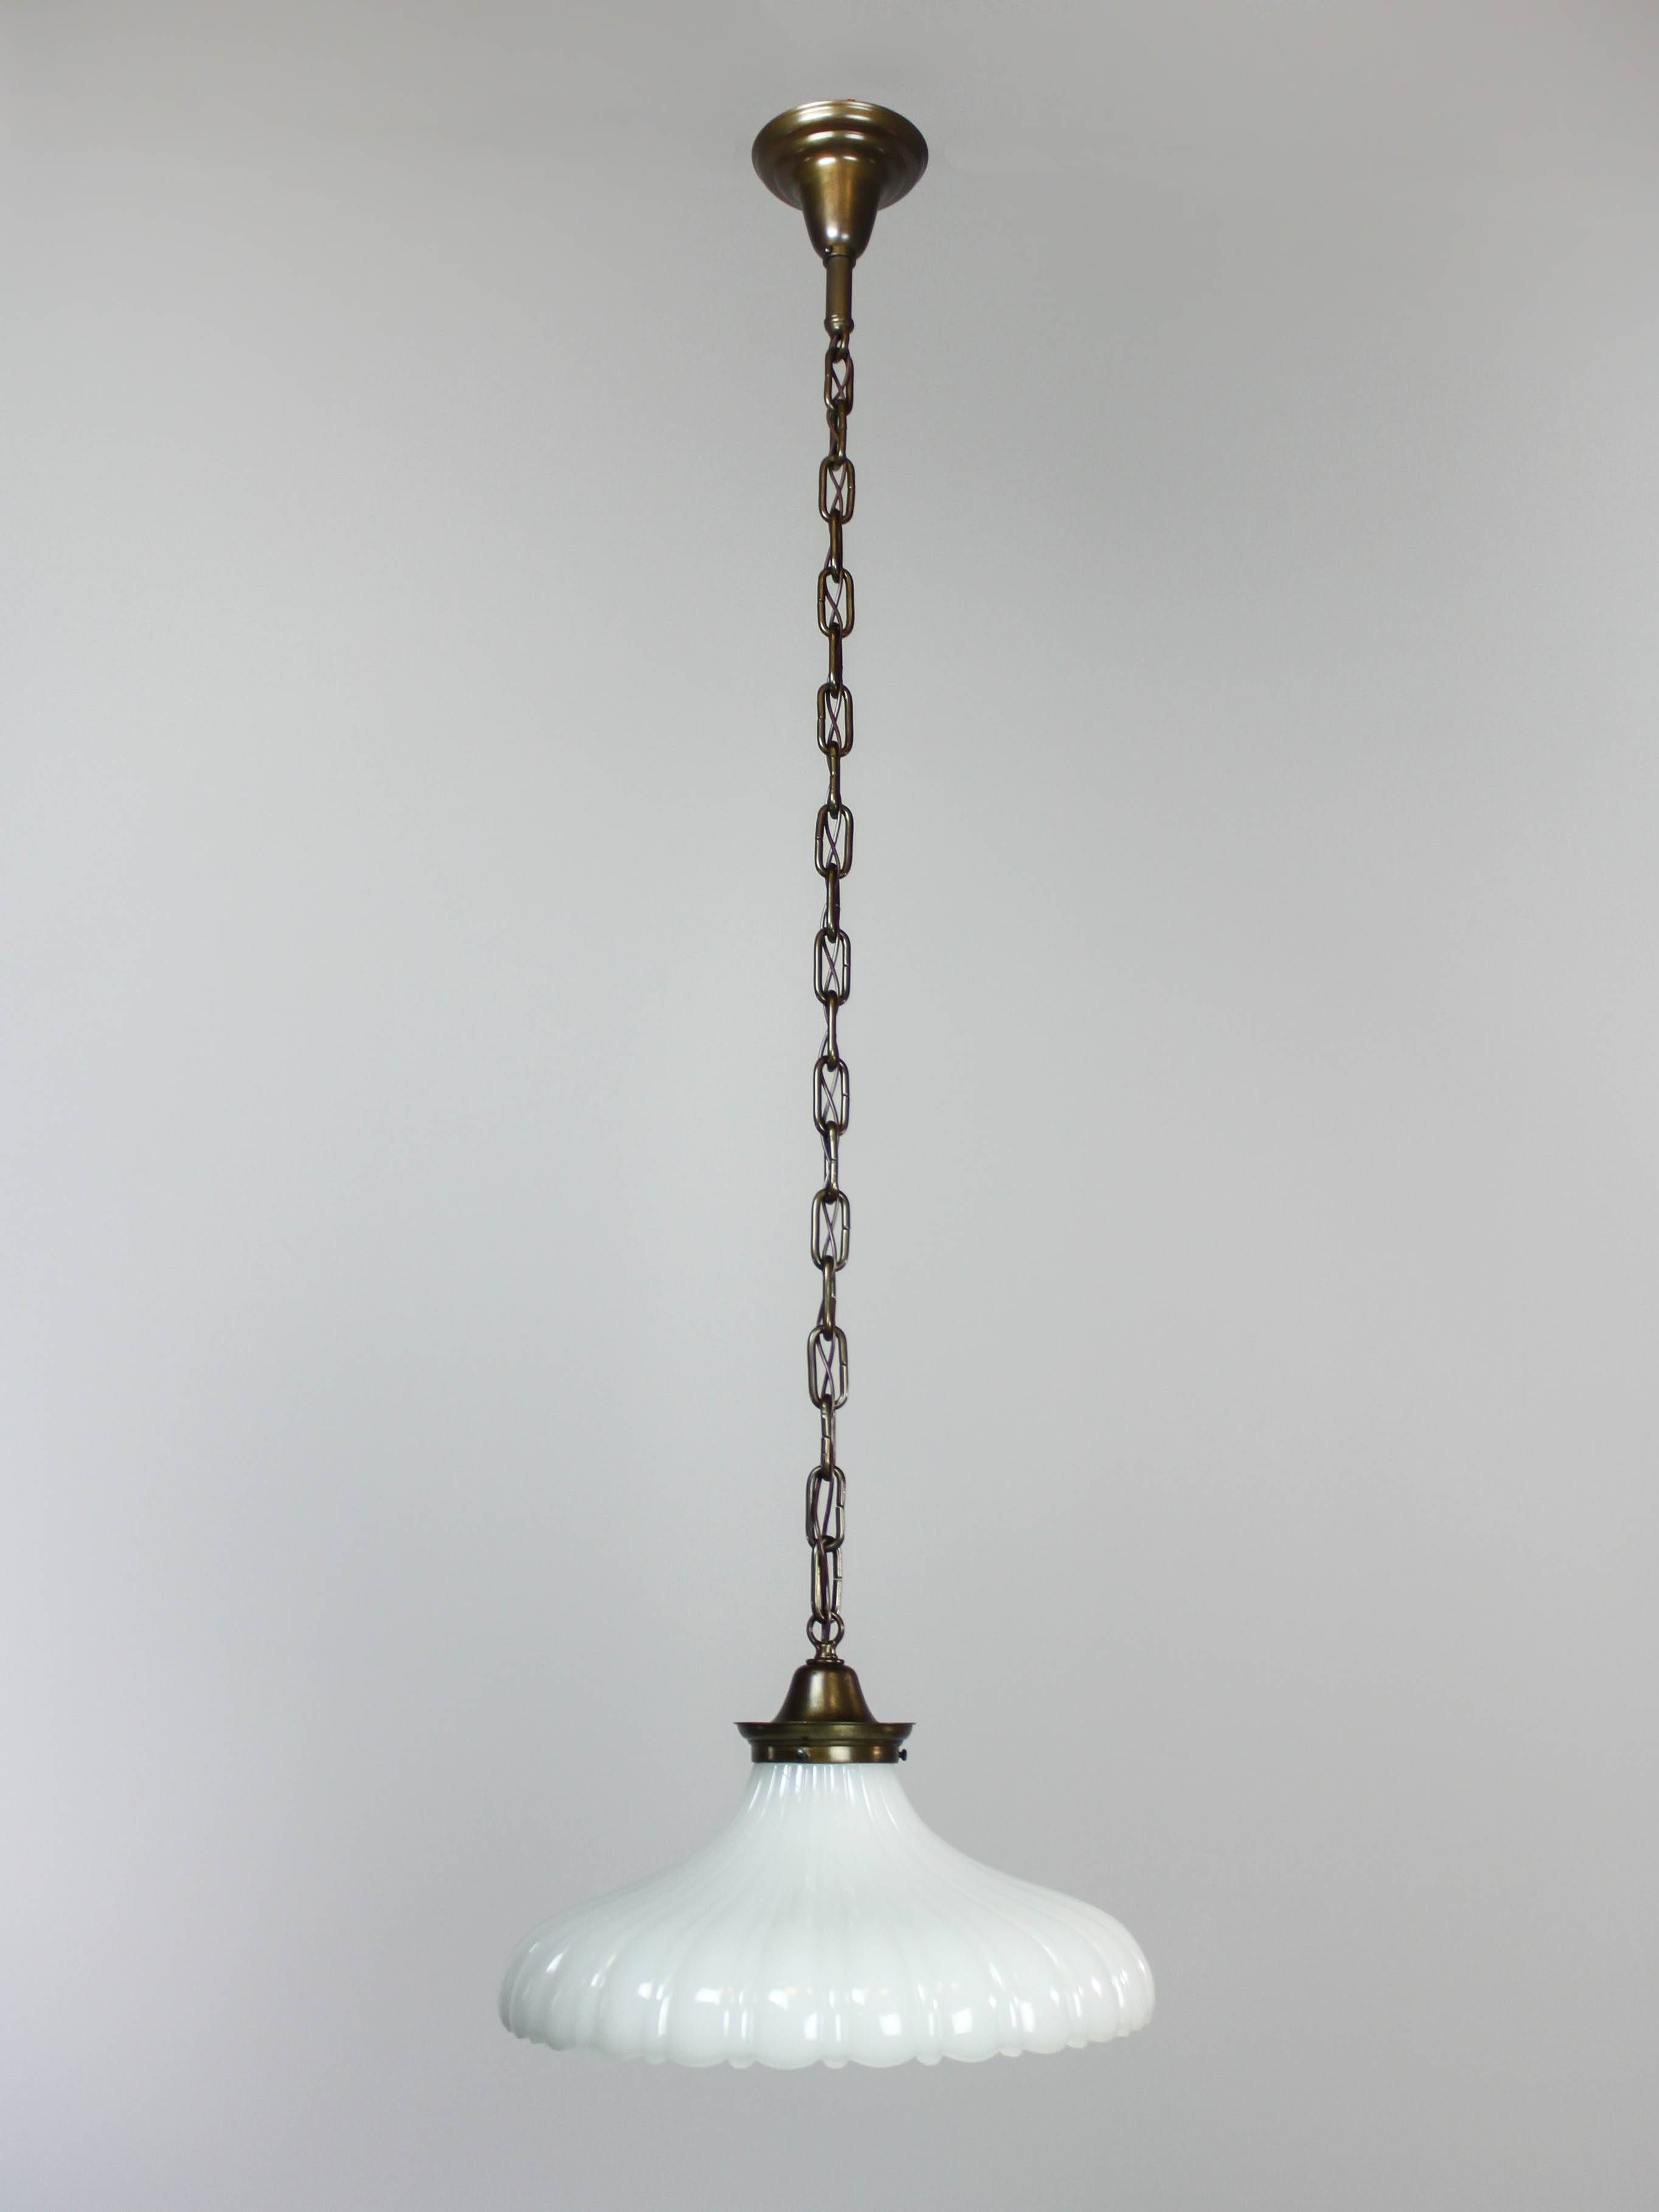 Inspirational Milk Glass Pendant Light 51 About Remodel Pendant With Milk Glass Pendant Lights Fixtures (View 5 of 15)